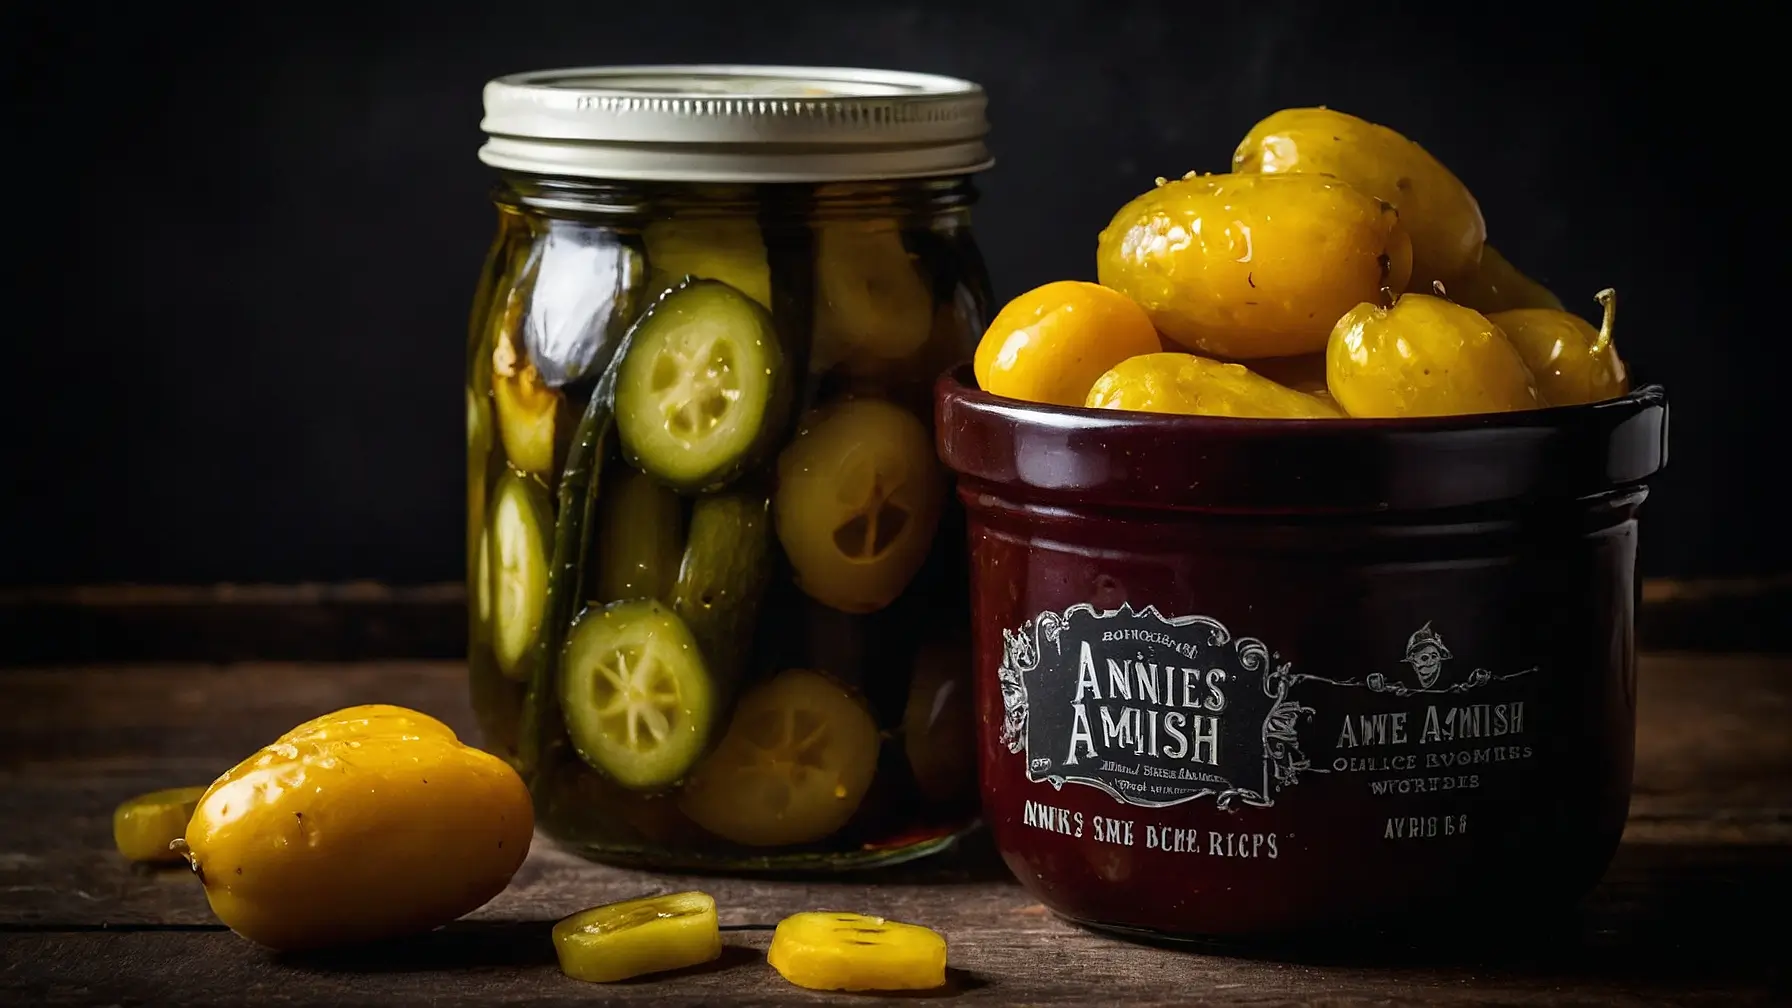 Annies recipes sweet amish pickles